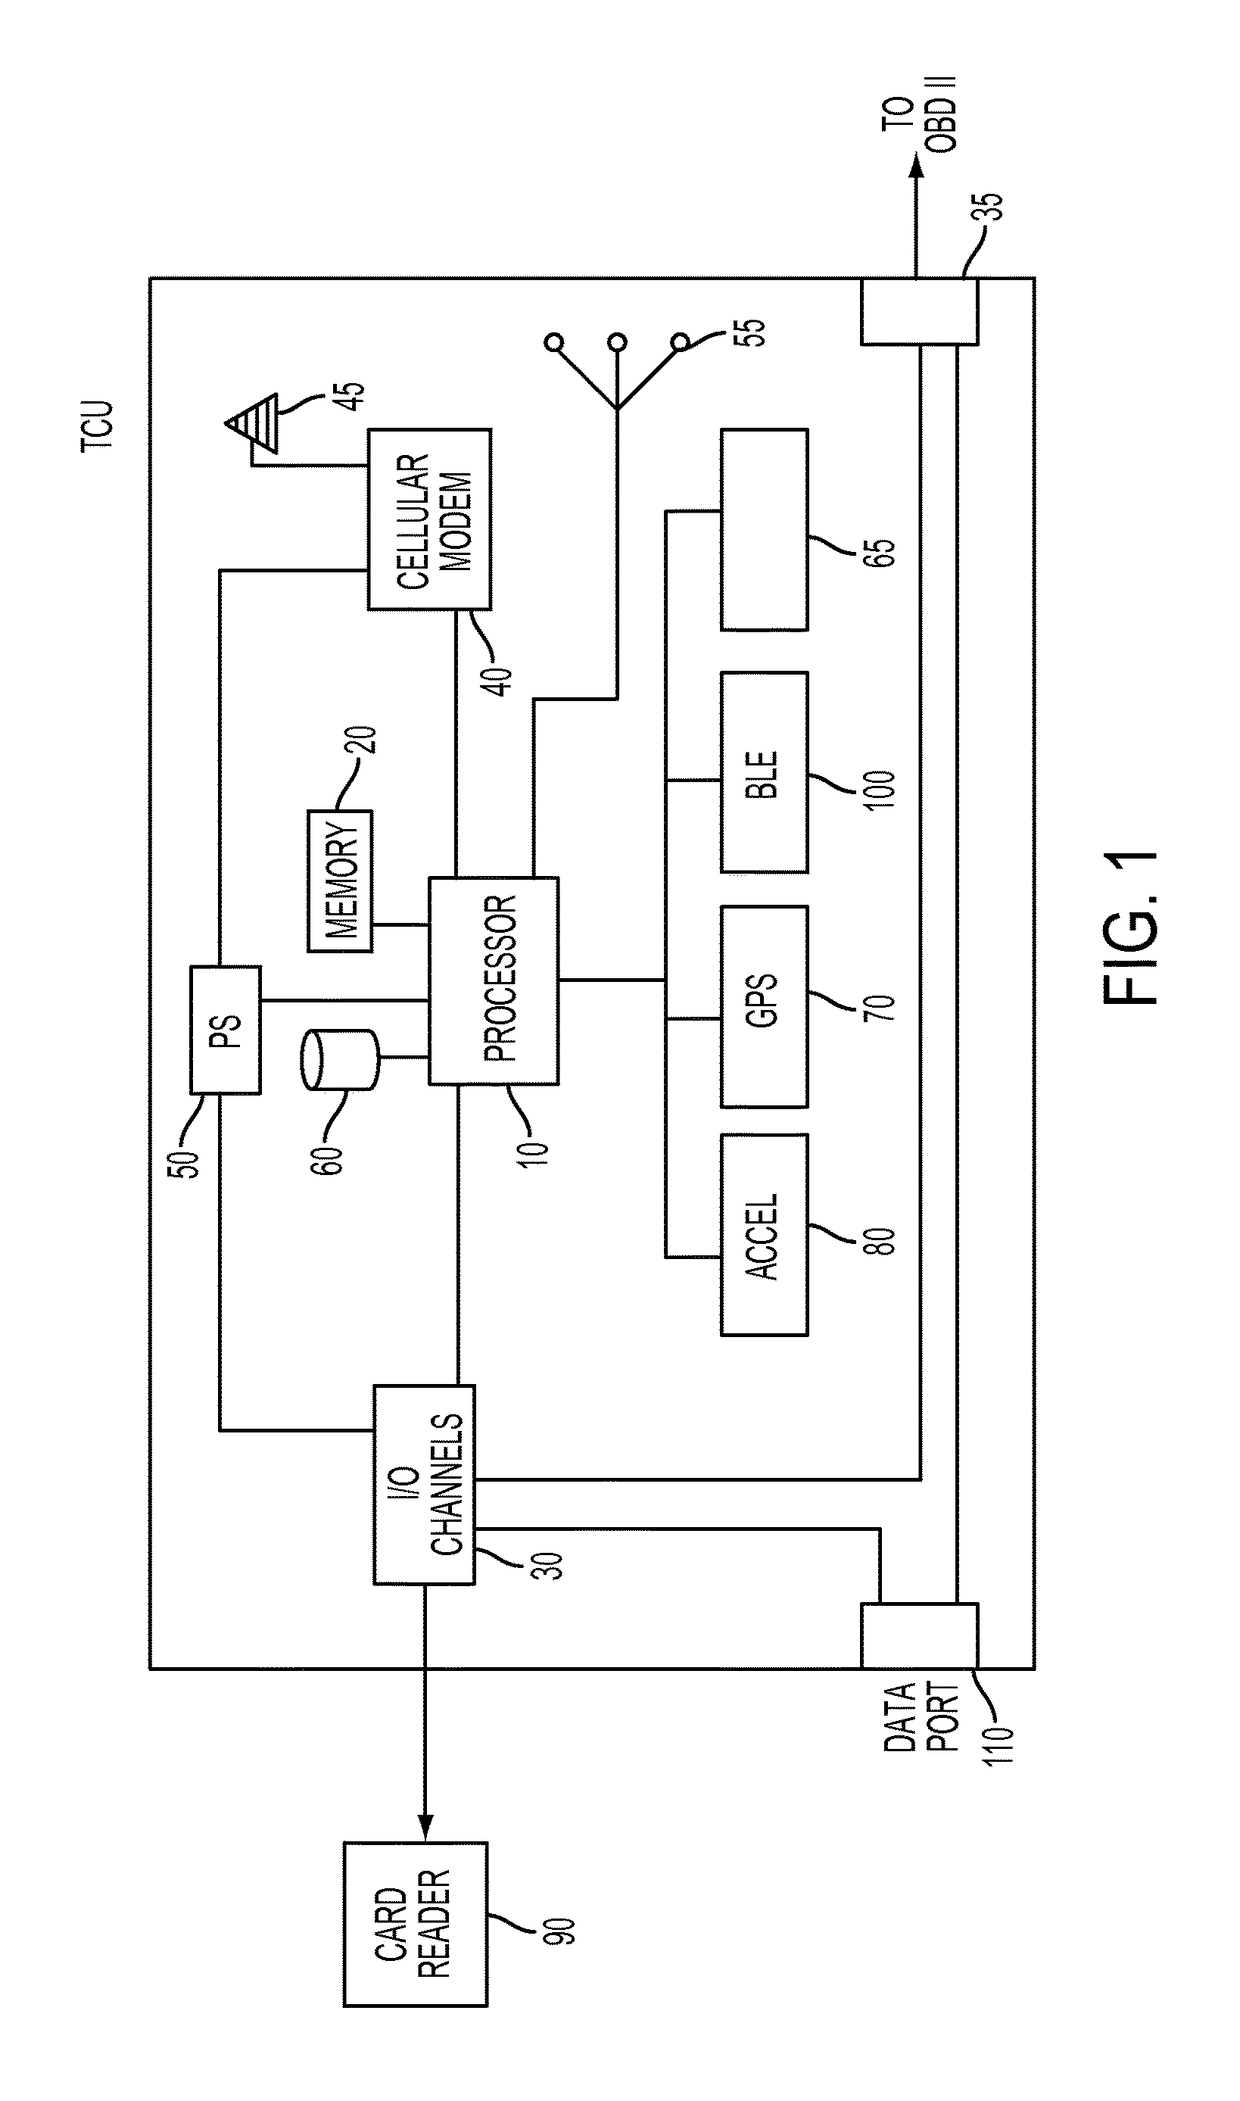 Telematics system, methods and apparatus for two-way data communication between vehicles in a fleet and a fleet management system